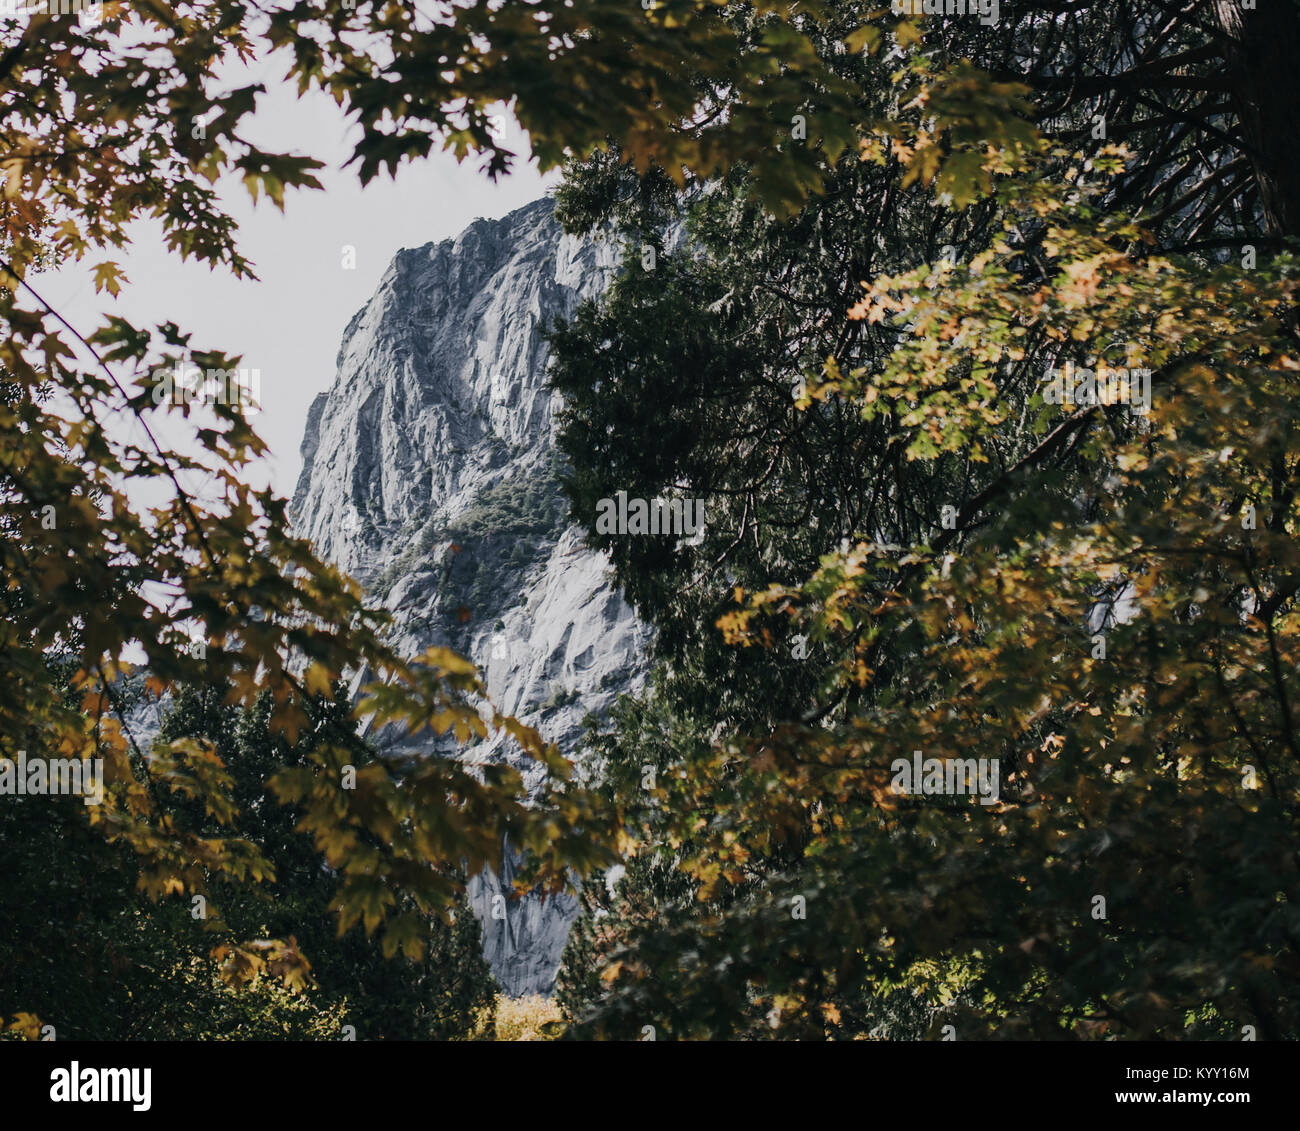 Low angle view of mountain seen through branches at Yosemite National Park Stock Photo